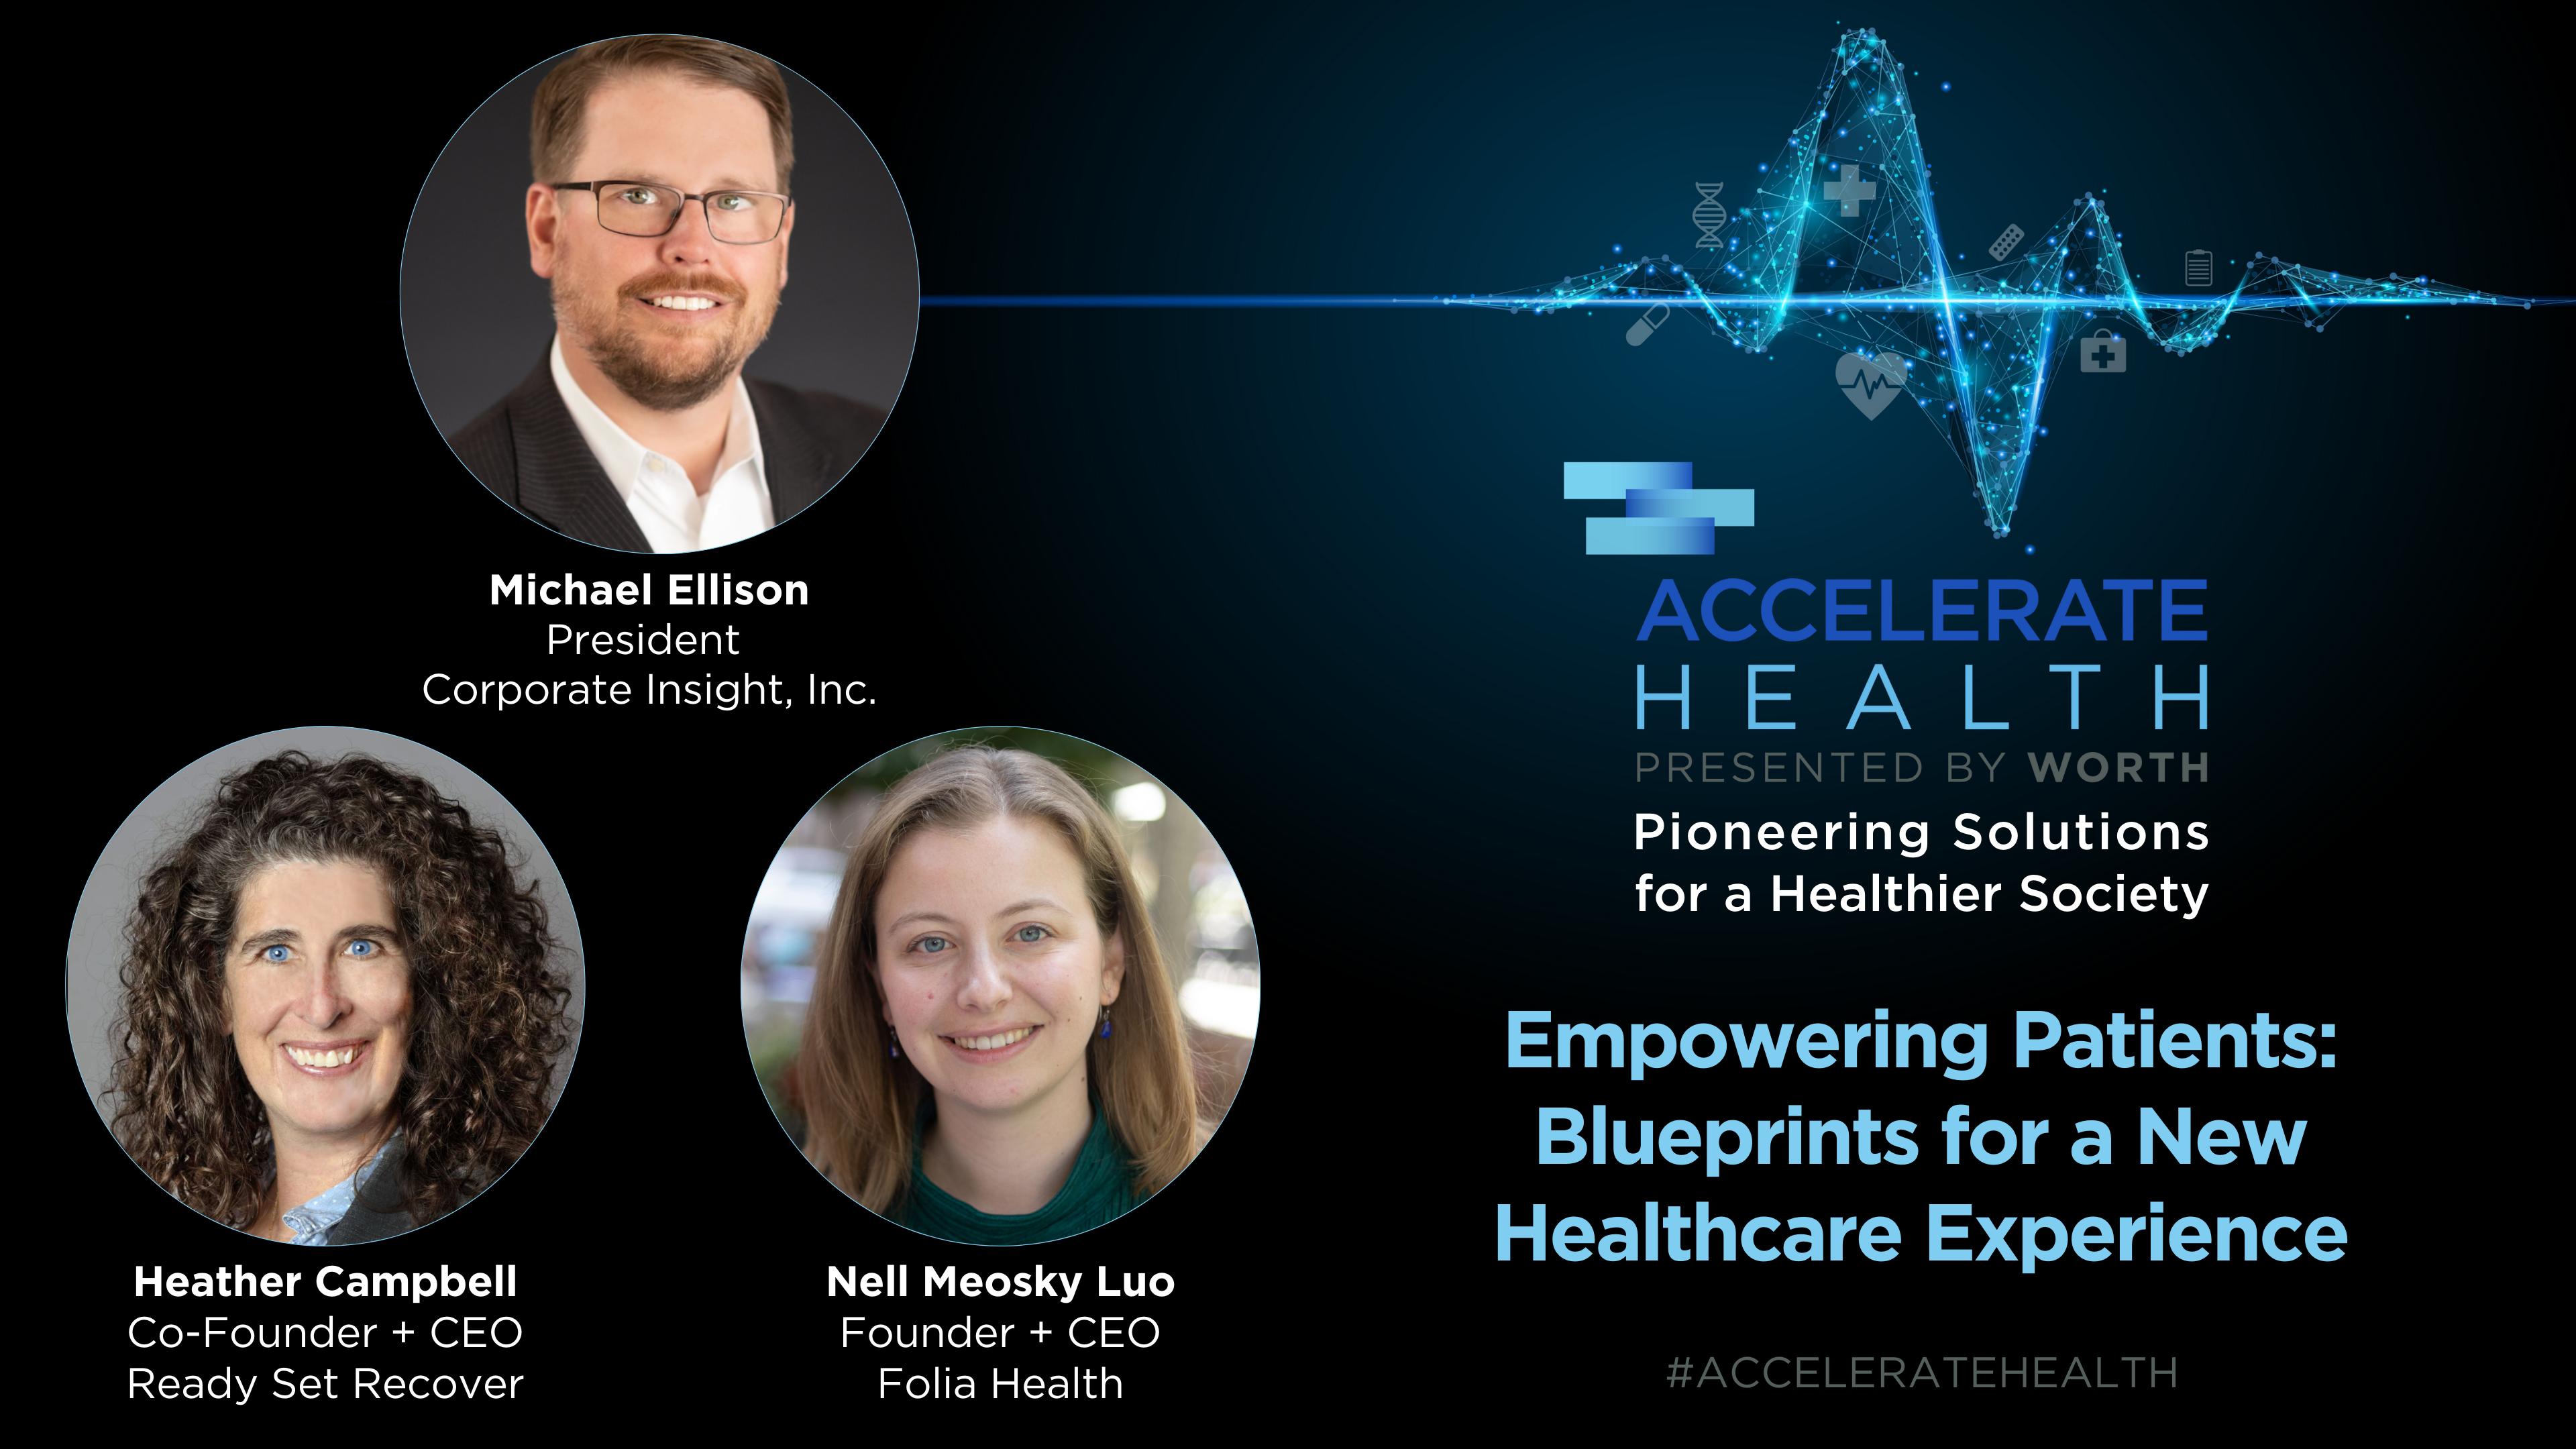 Empowering Patients Blueprints for a New Healthcare Experience